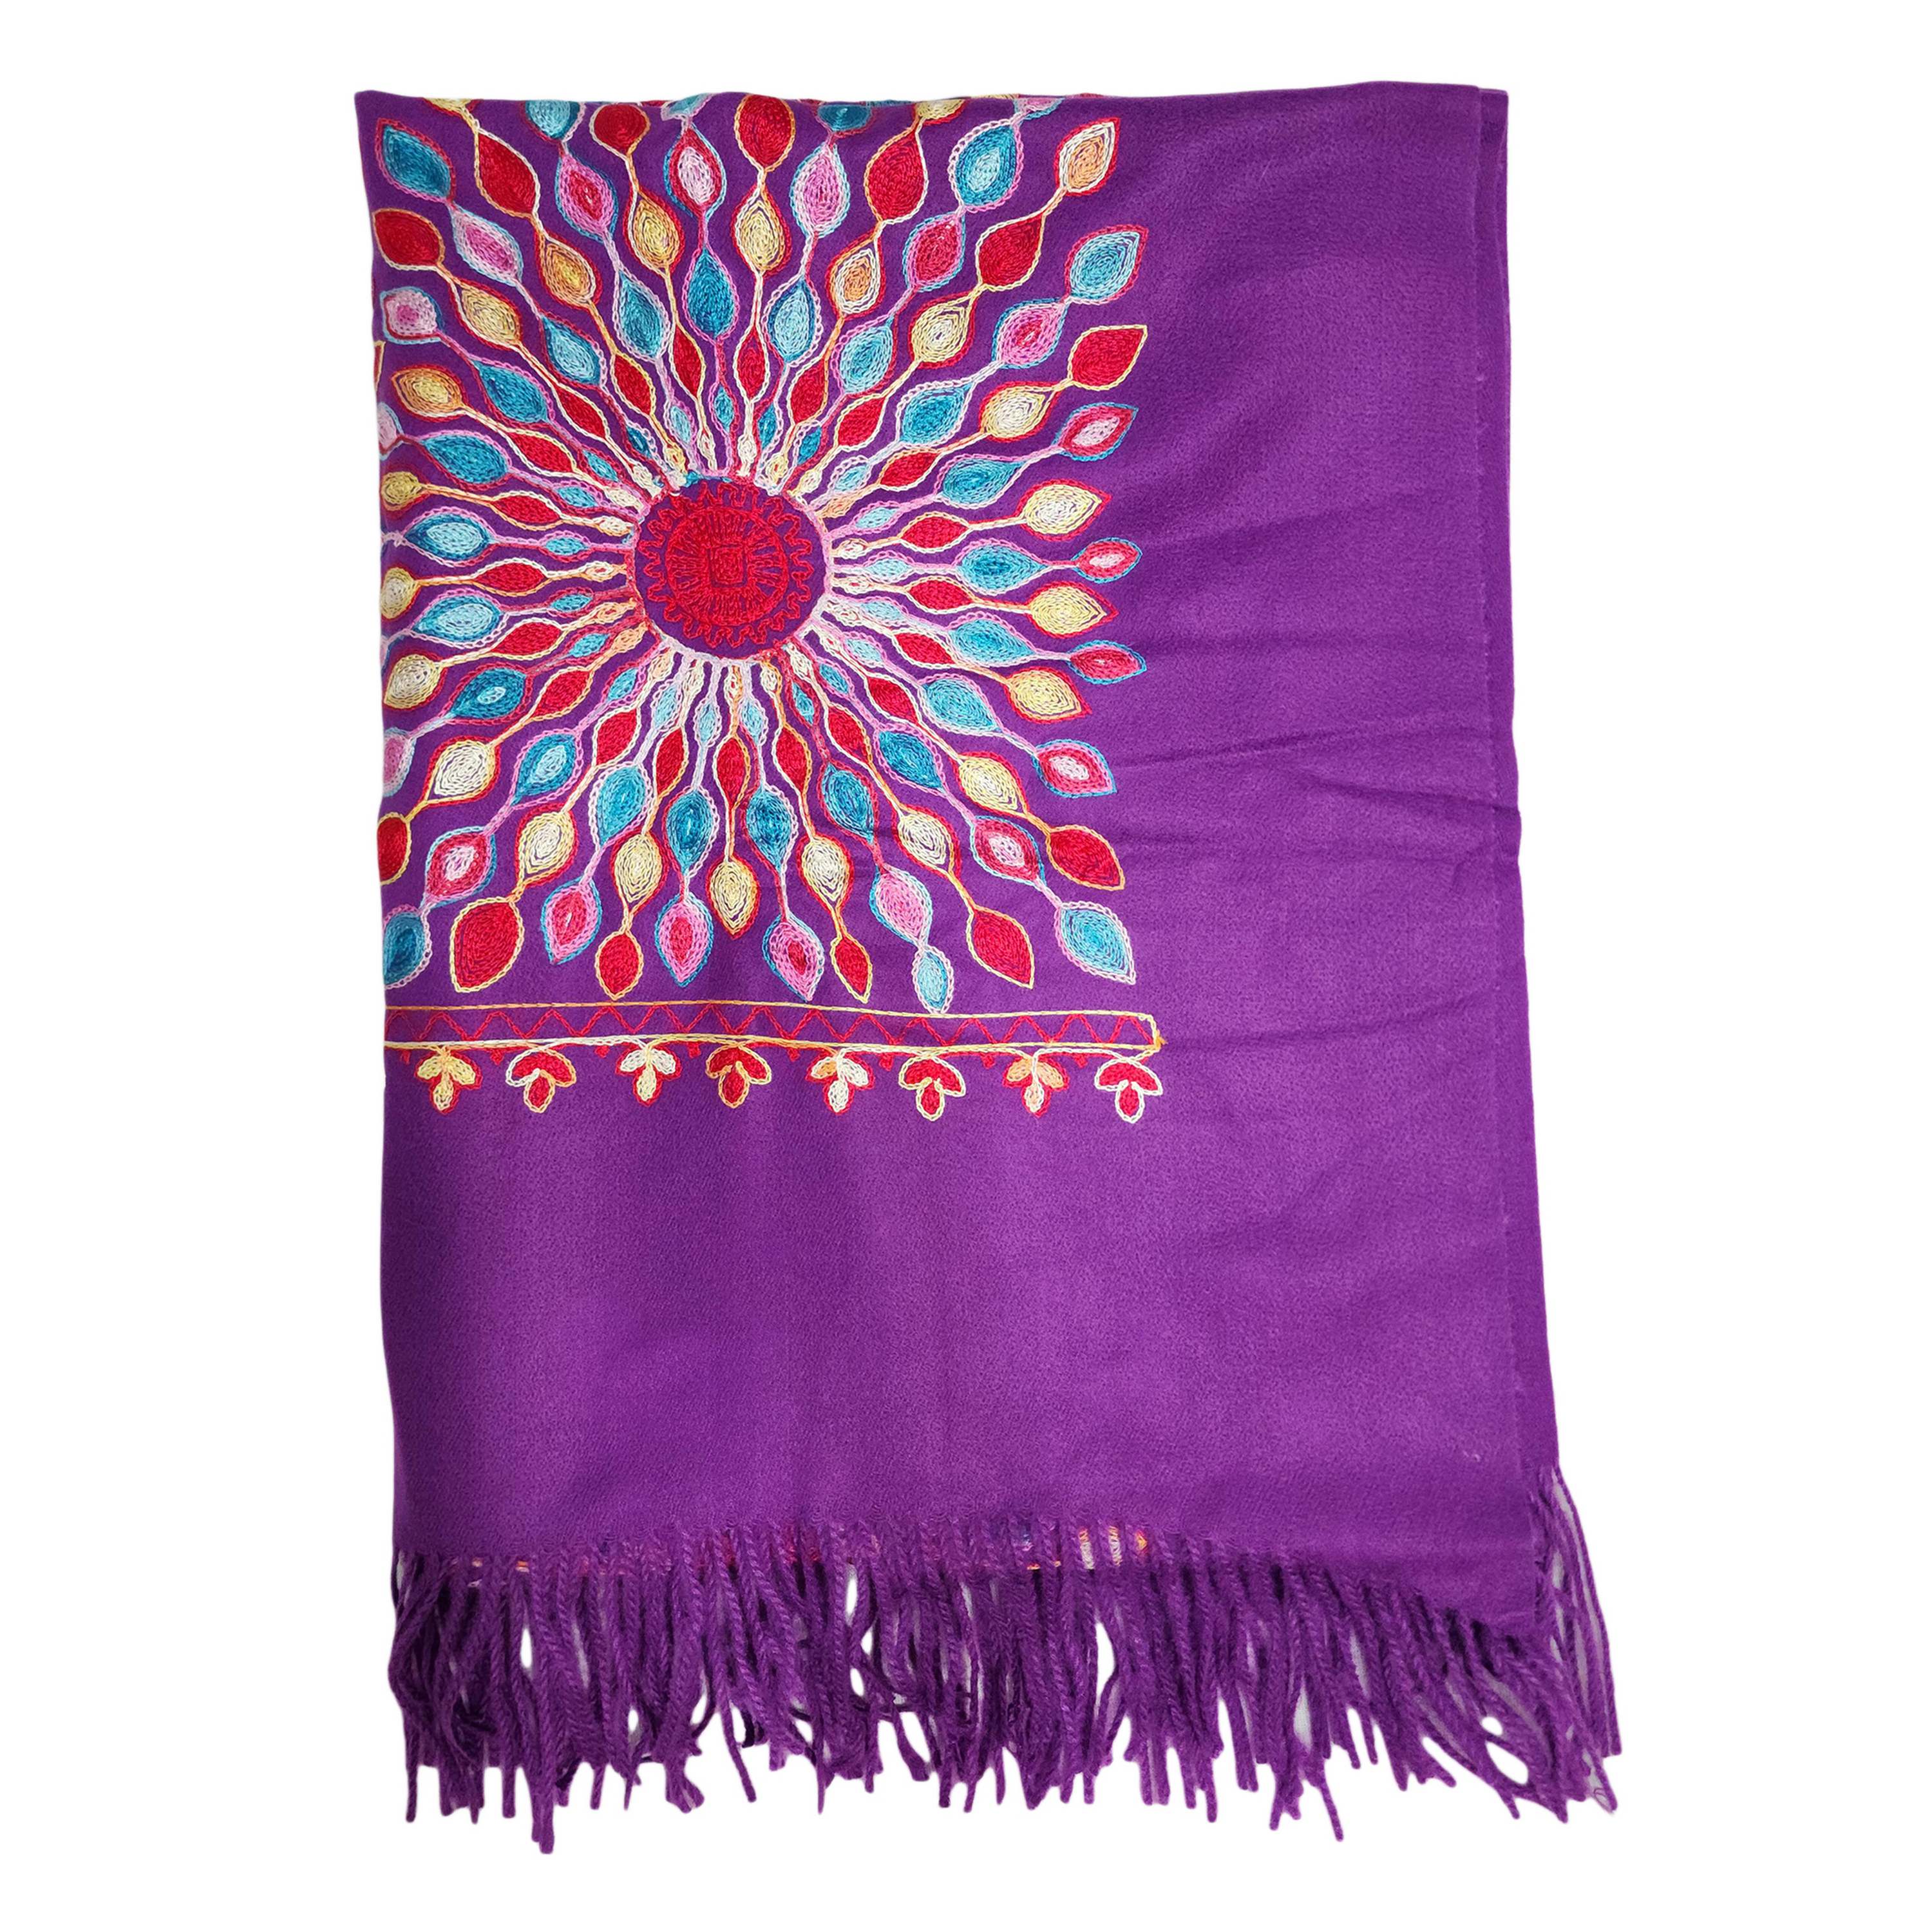 Desigener Shawl, Thick Nepali Shawl, With Heavy Embroidery, Color purple